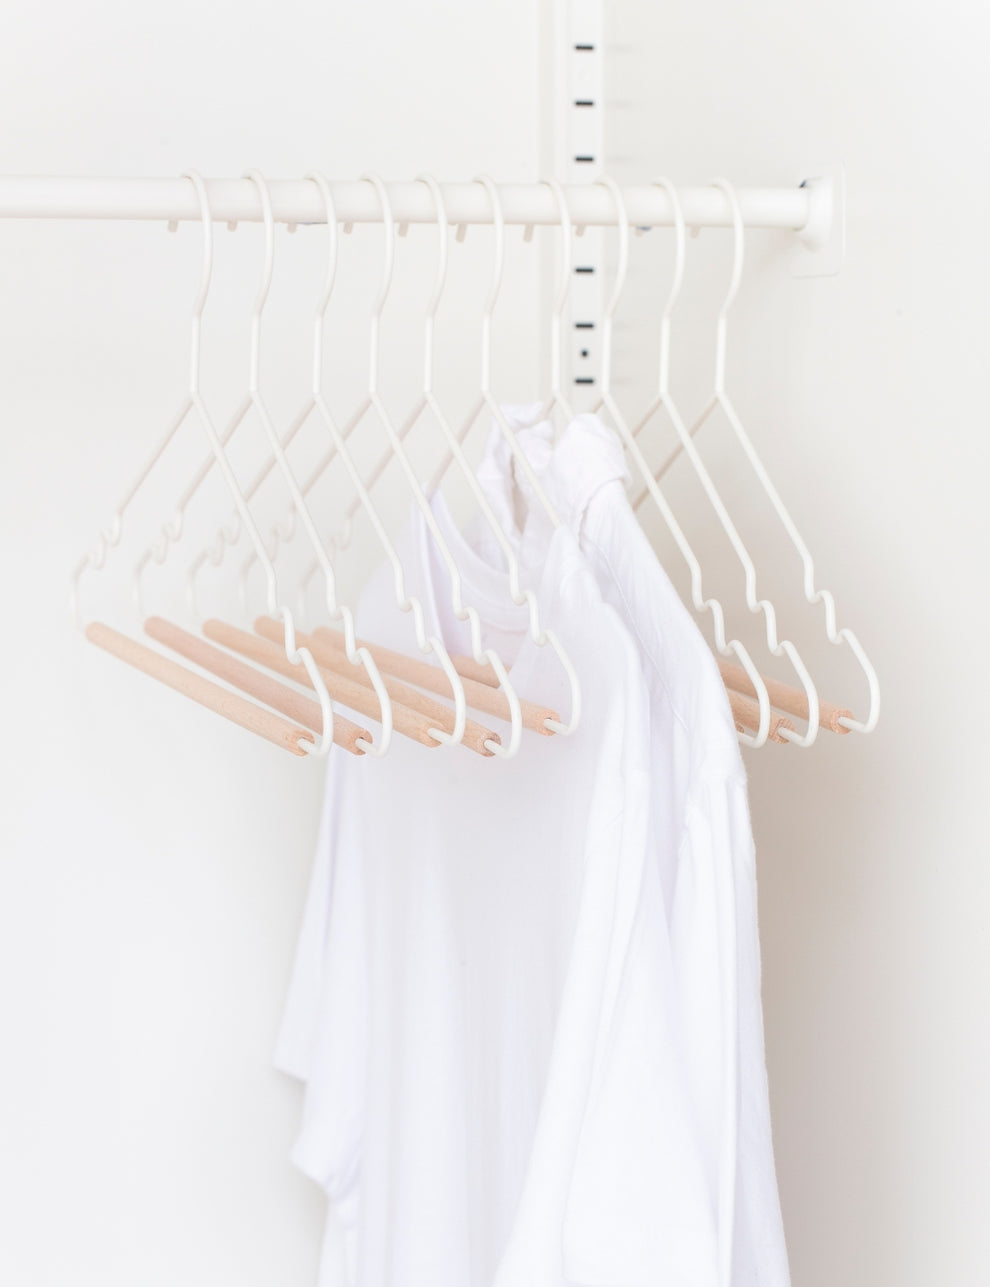 Adult Top Hangers in White